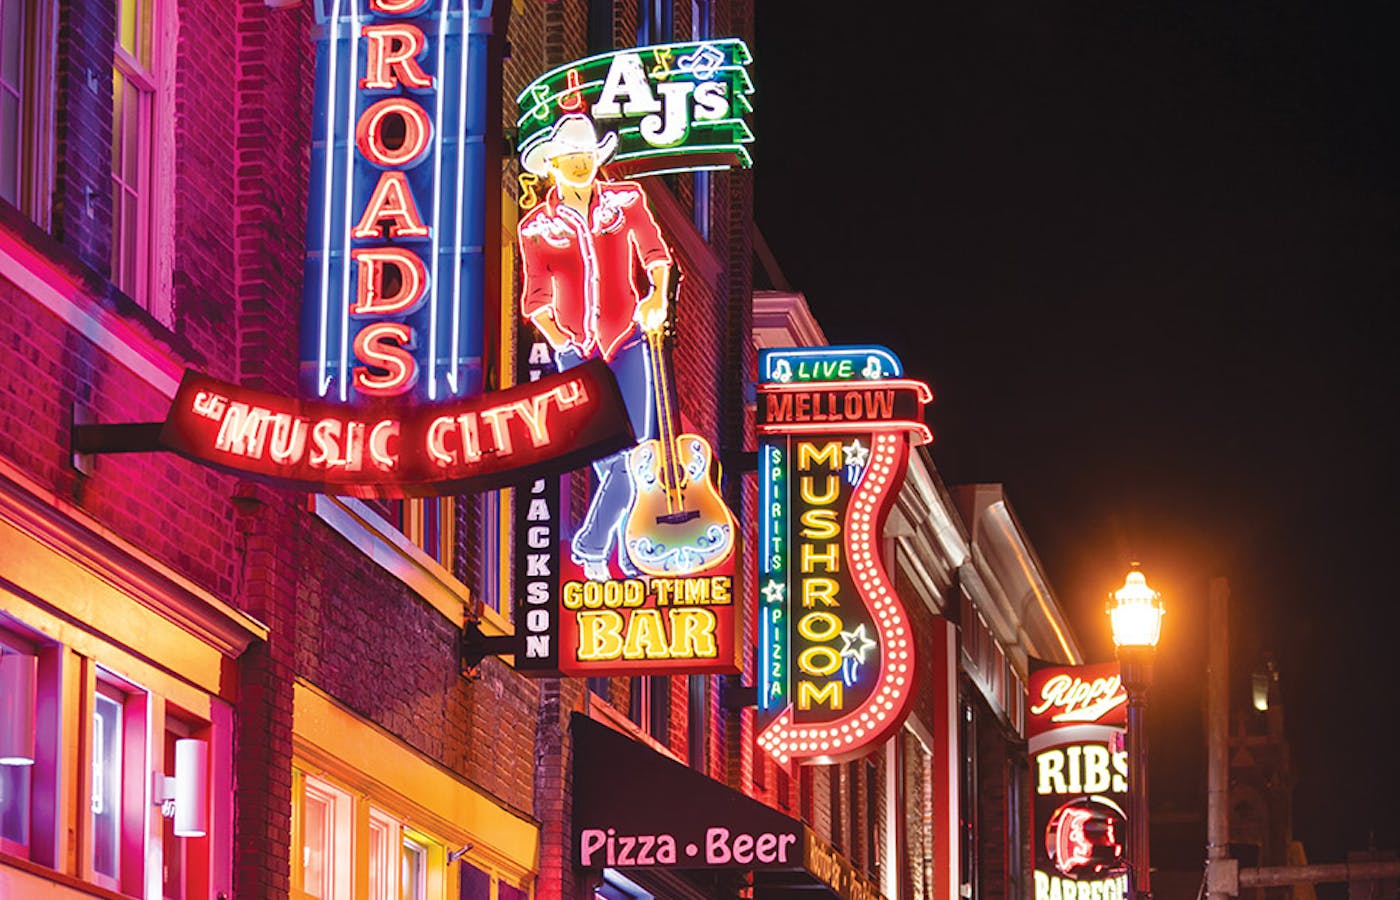 Neon signs lining street along Broadway Nashville, Tennessee (photo by iStock)